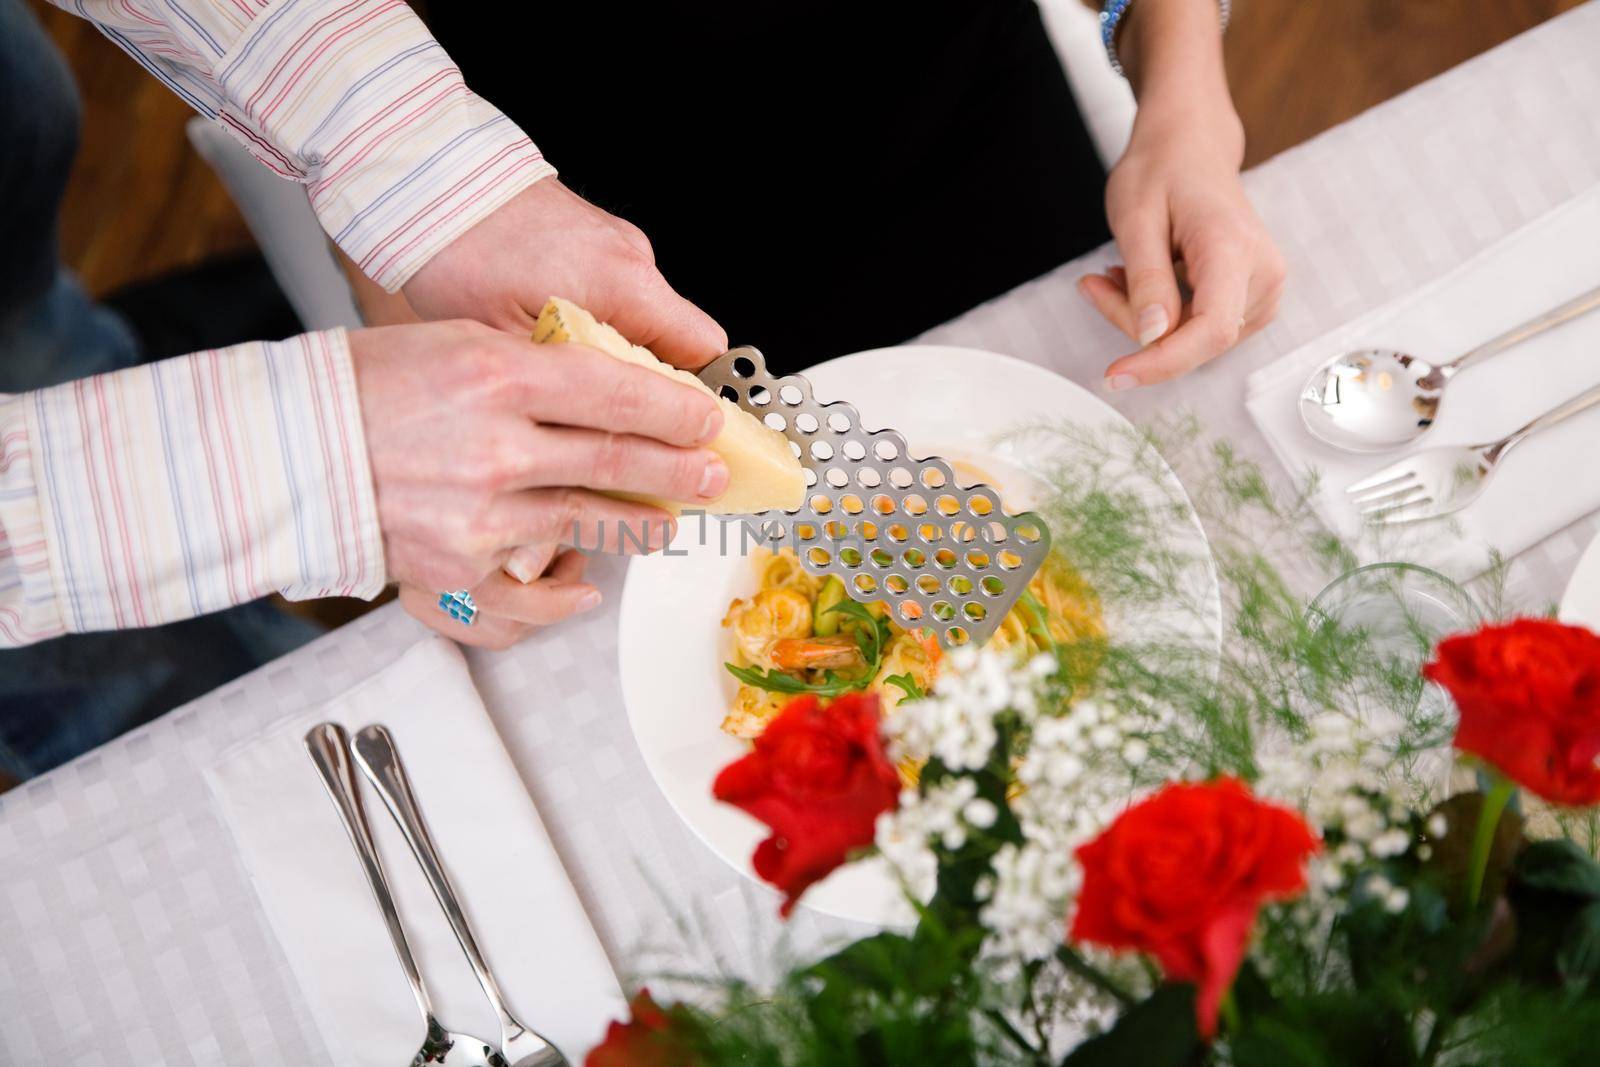 Man grating cheese over pasta, domestic setting (selective focus on the cheese grater)